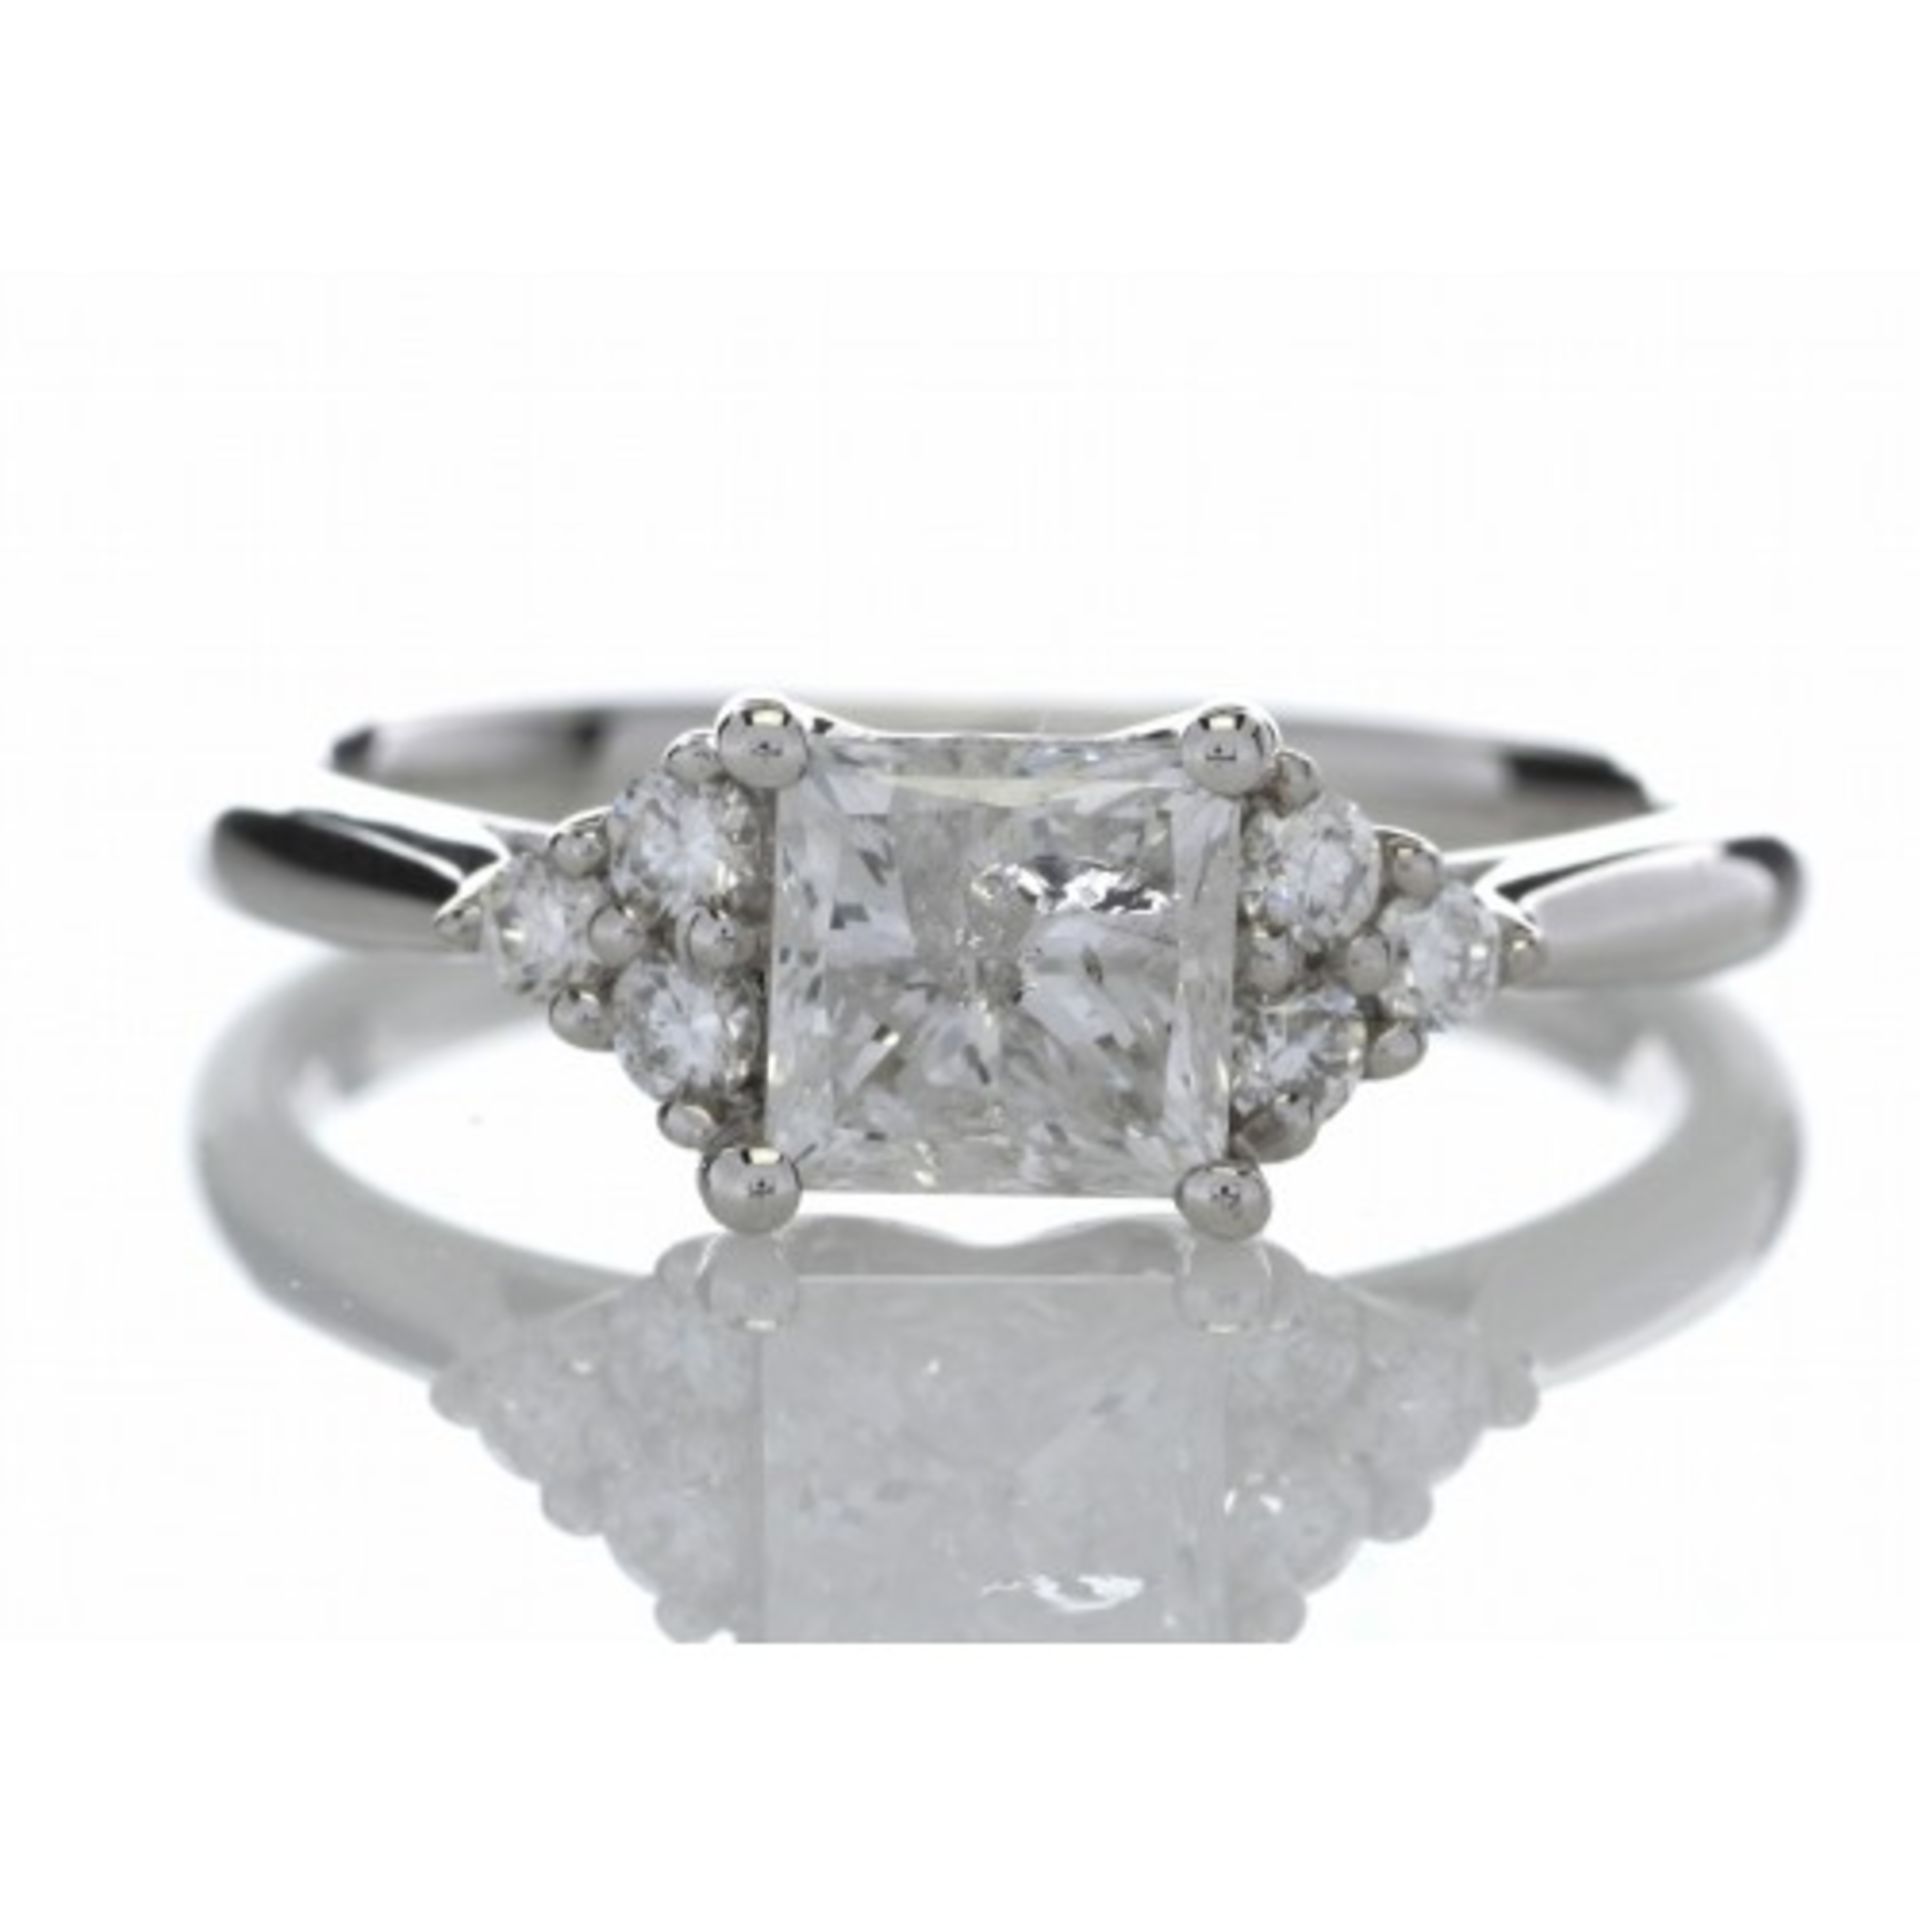 1.25ct diamond set ring set in 18ct gold. 1.06ct princess cut centre stone, D colour and I1 clarity.